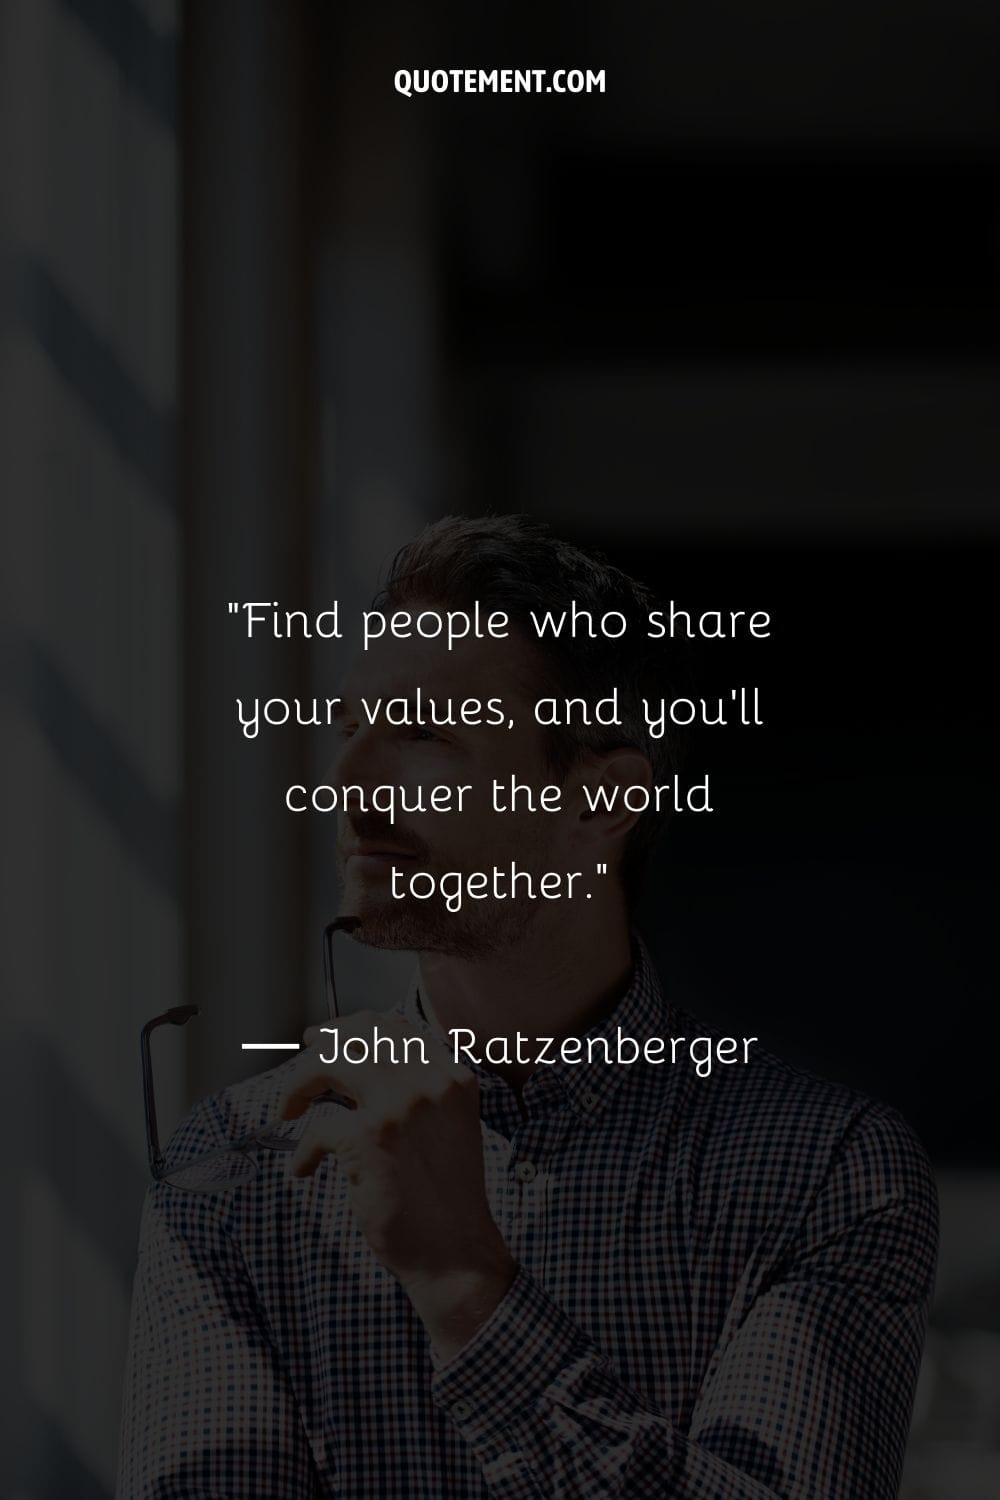 Find people who share your values, and you'll conquer the world together